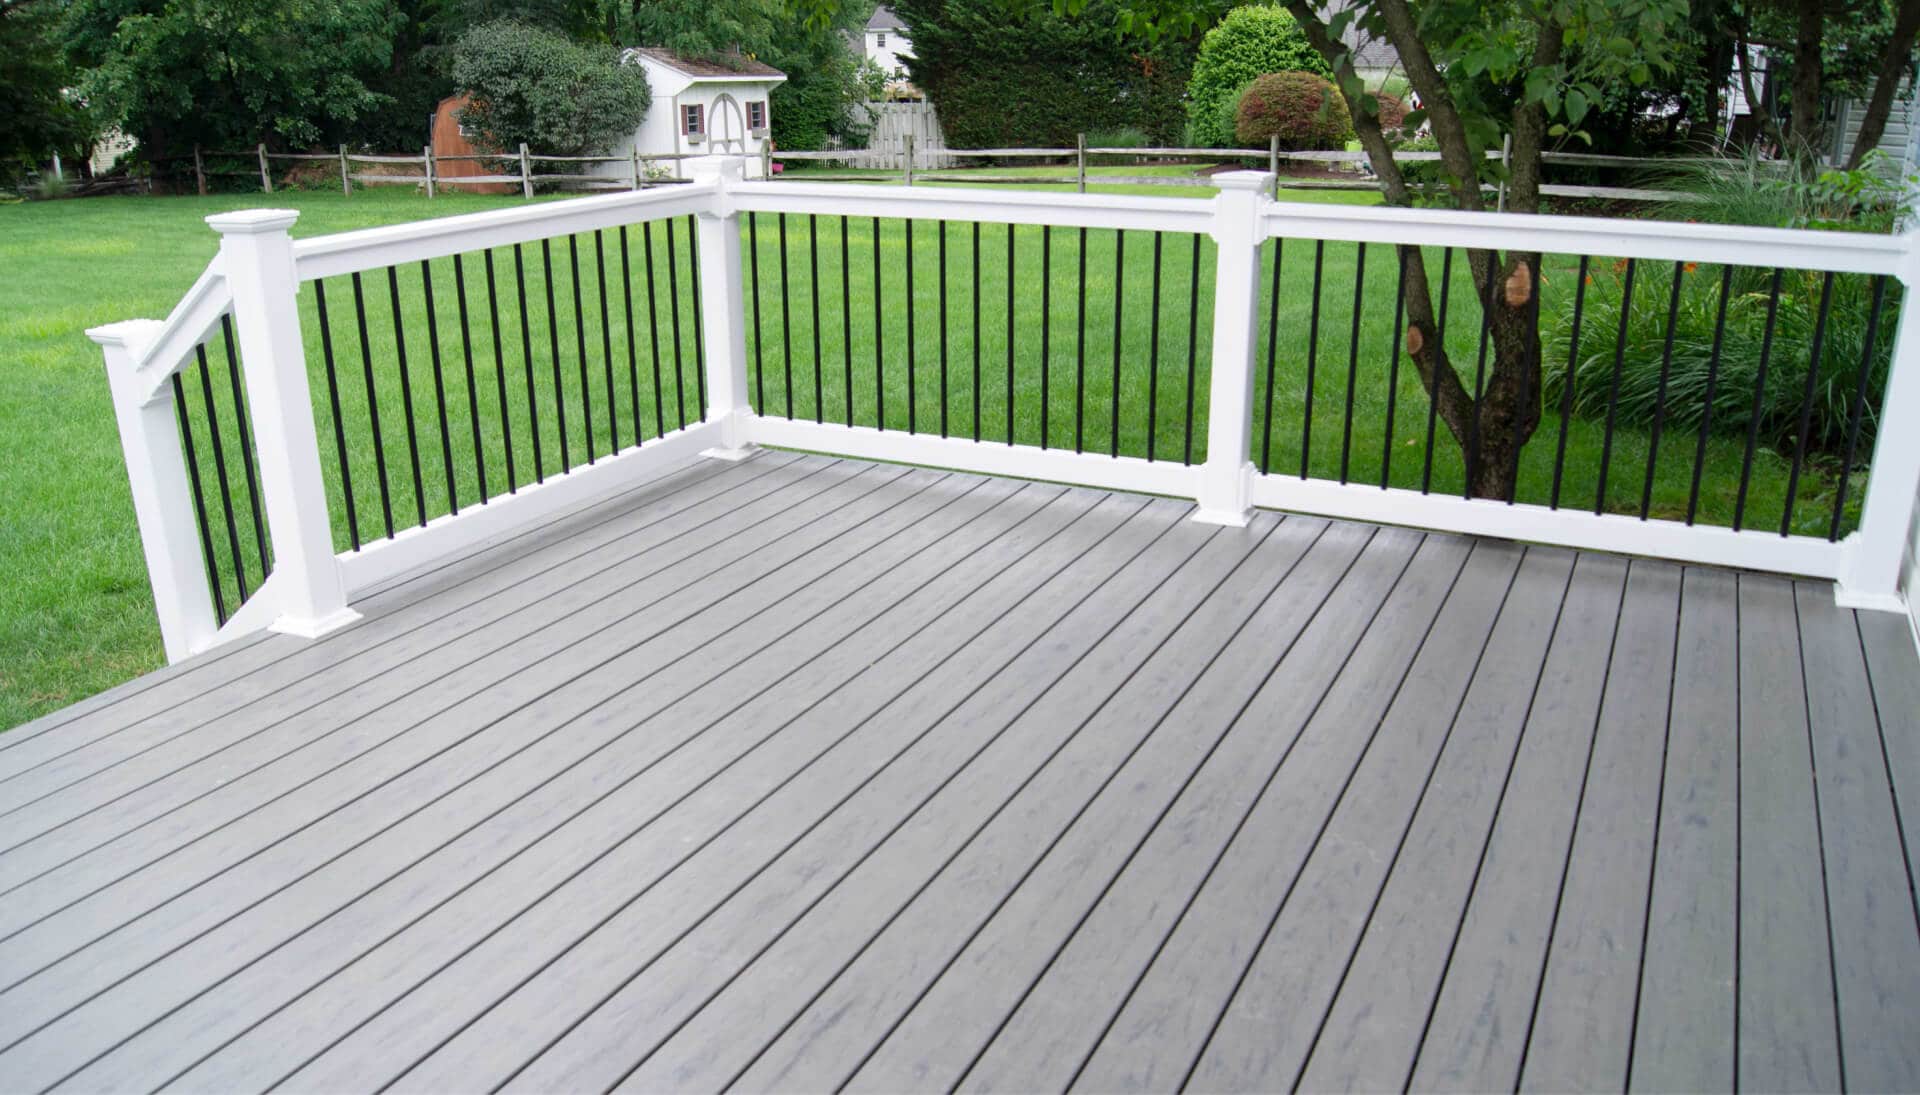 Experts in deck railing and covers Bel Air, MD